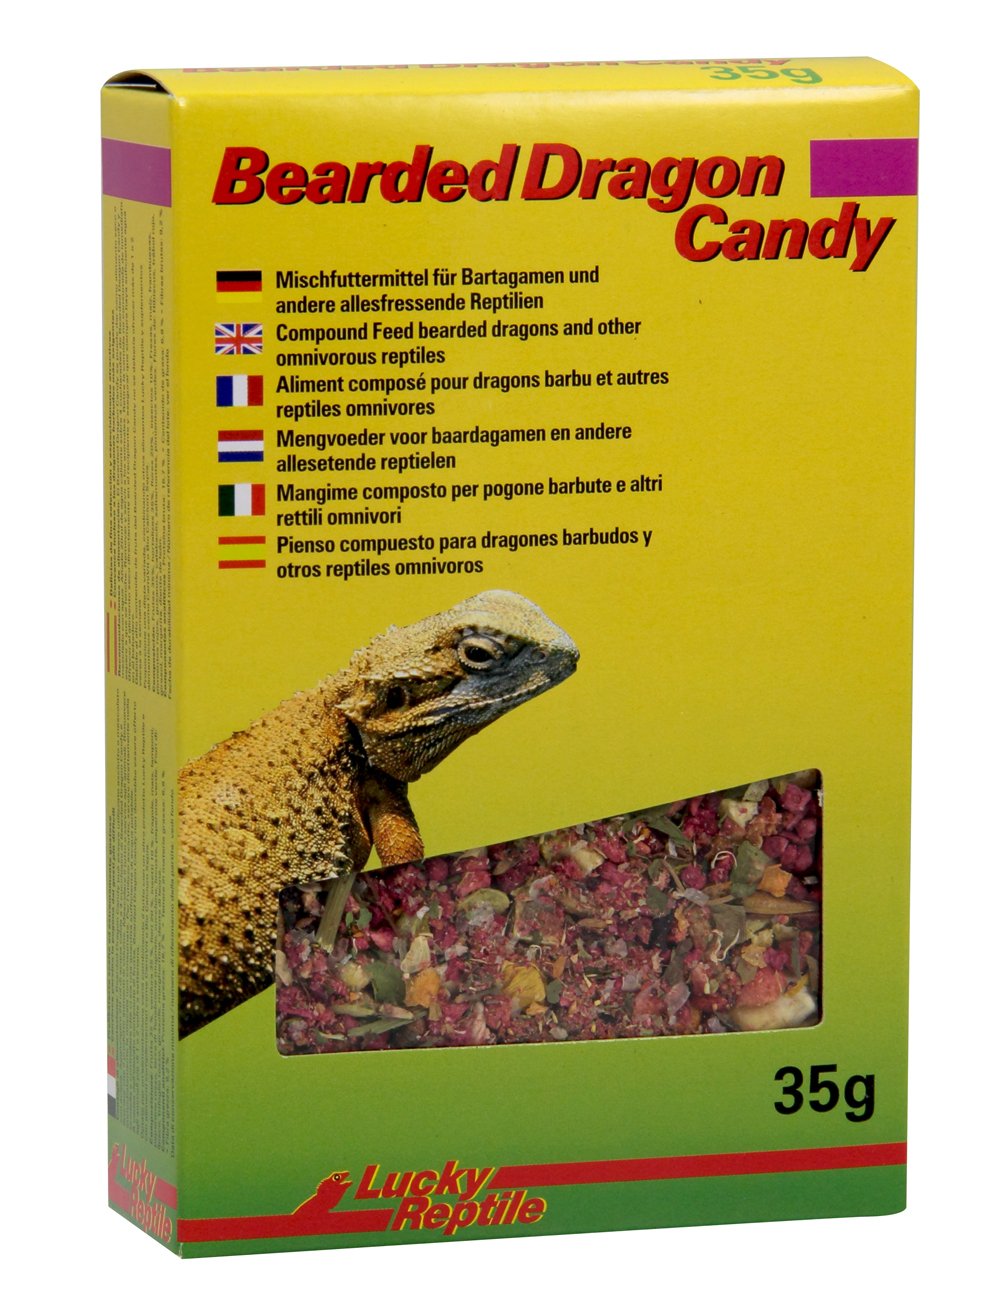 Import-Export Peter Hoch GmbH Bearded Dragon Candy 35 g